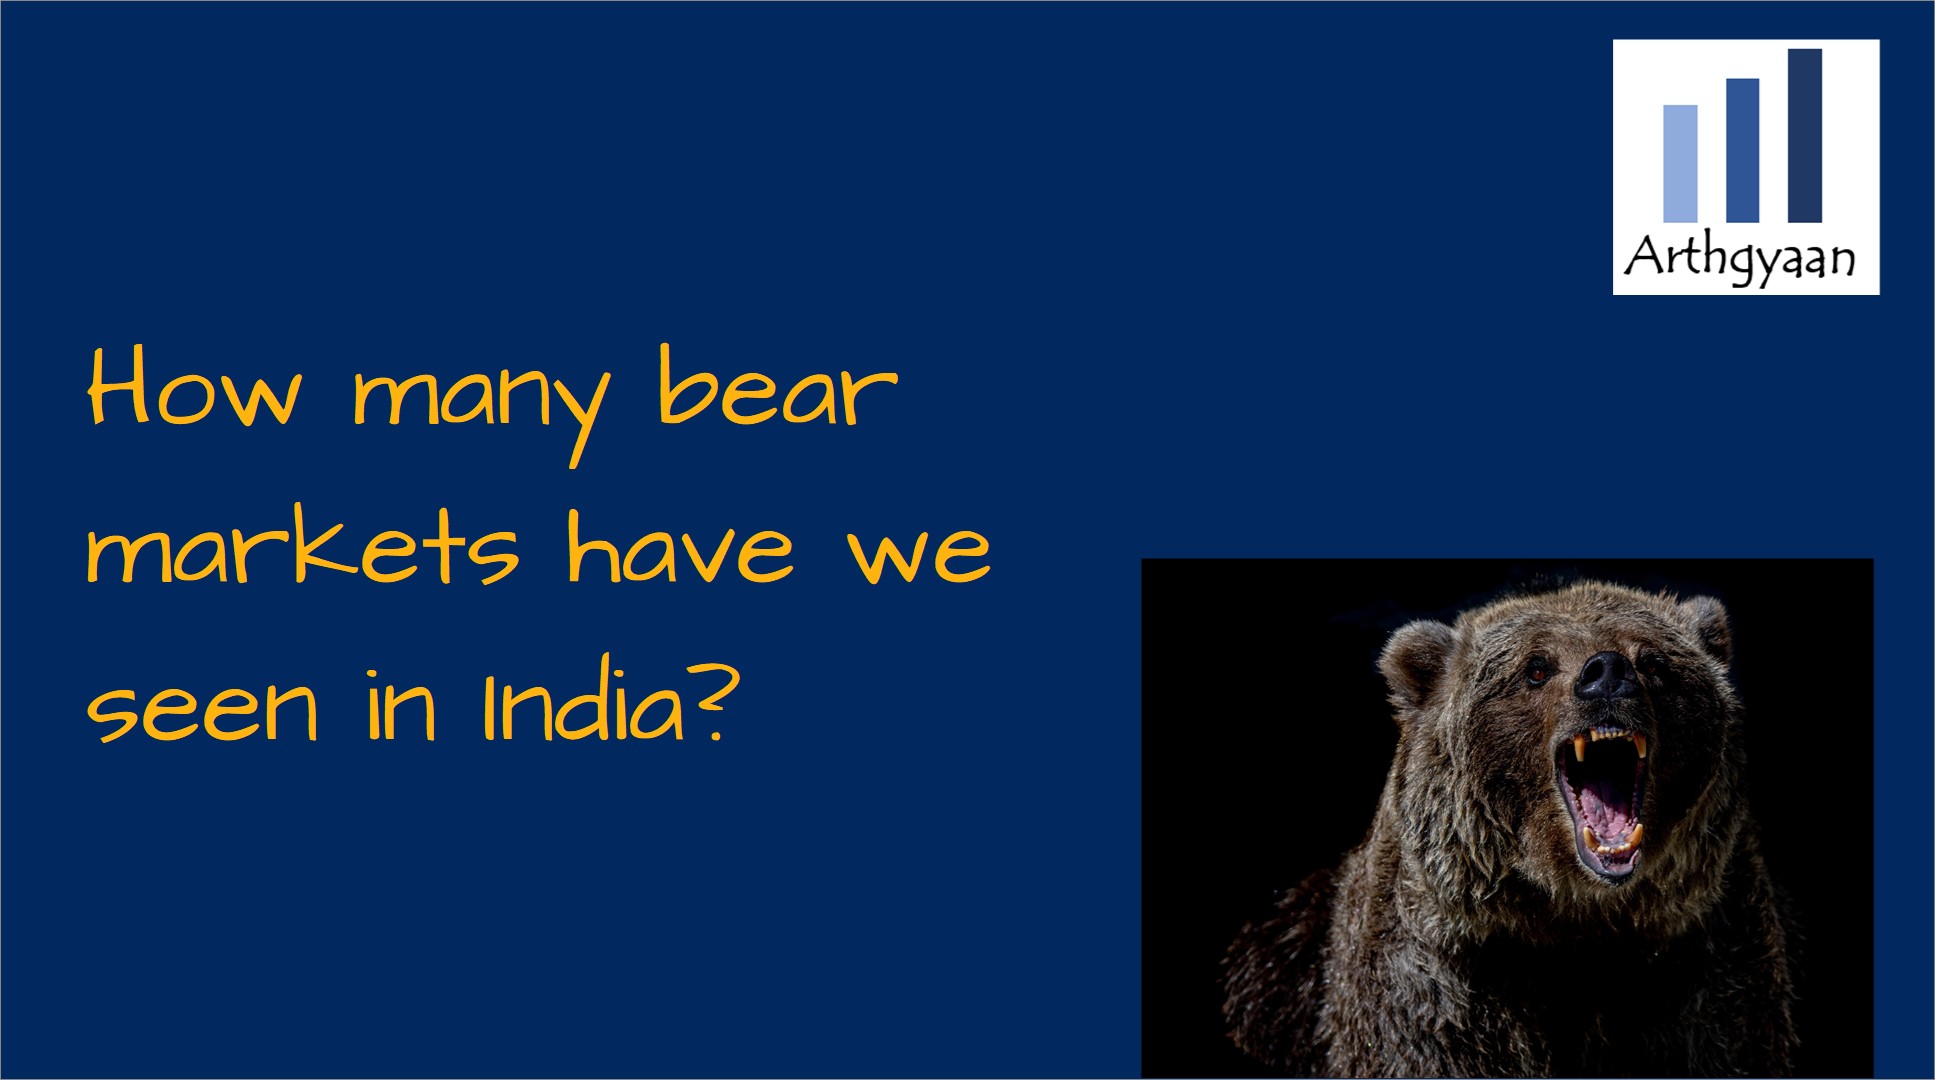 How many bear markets have we seen in India?